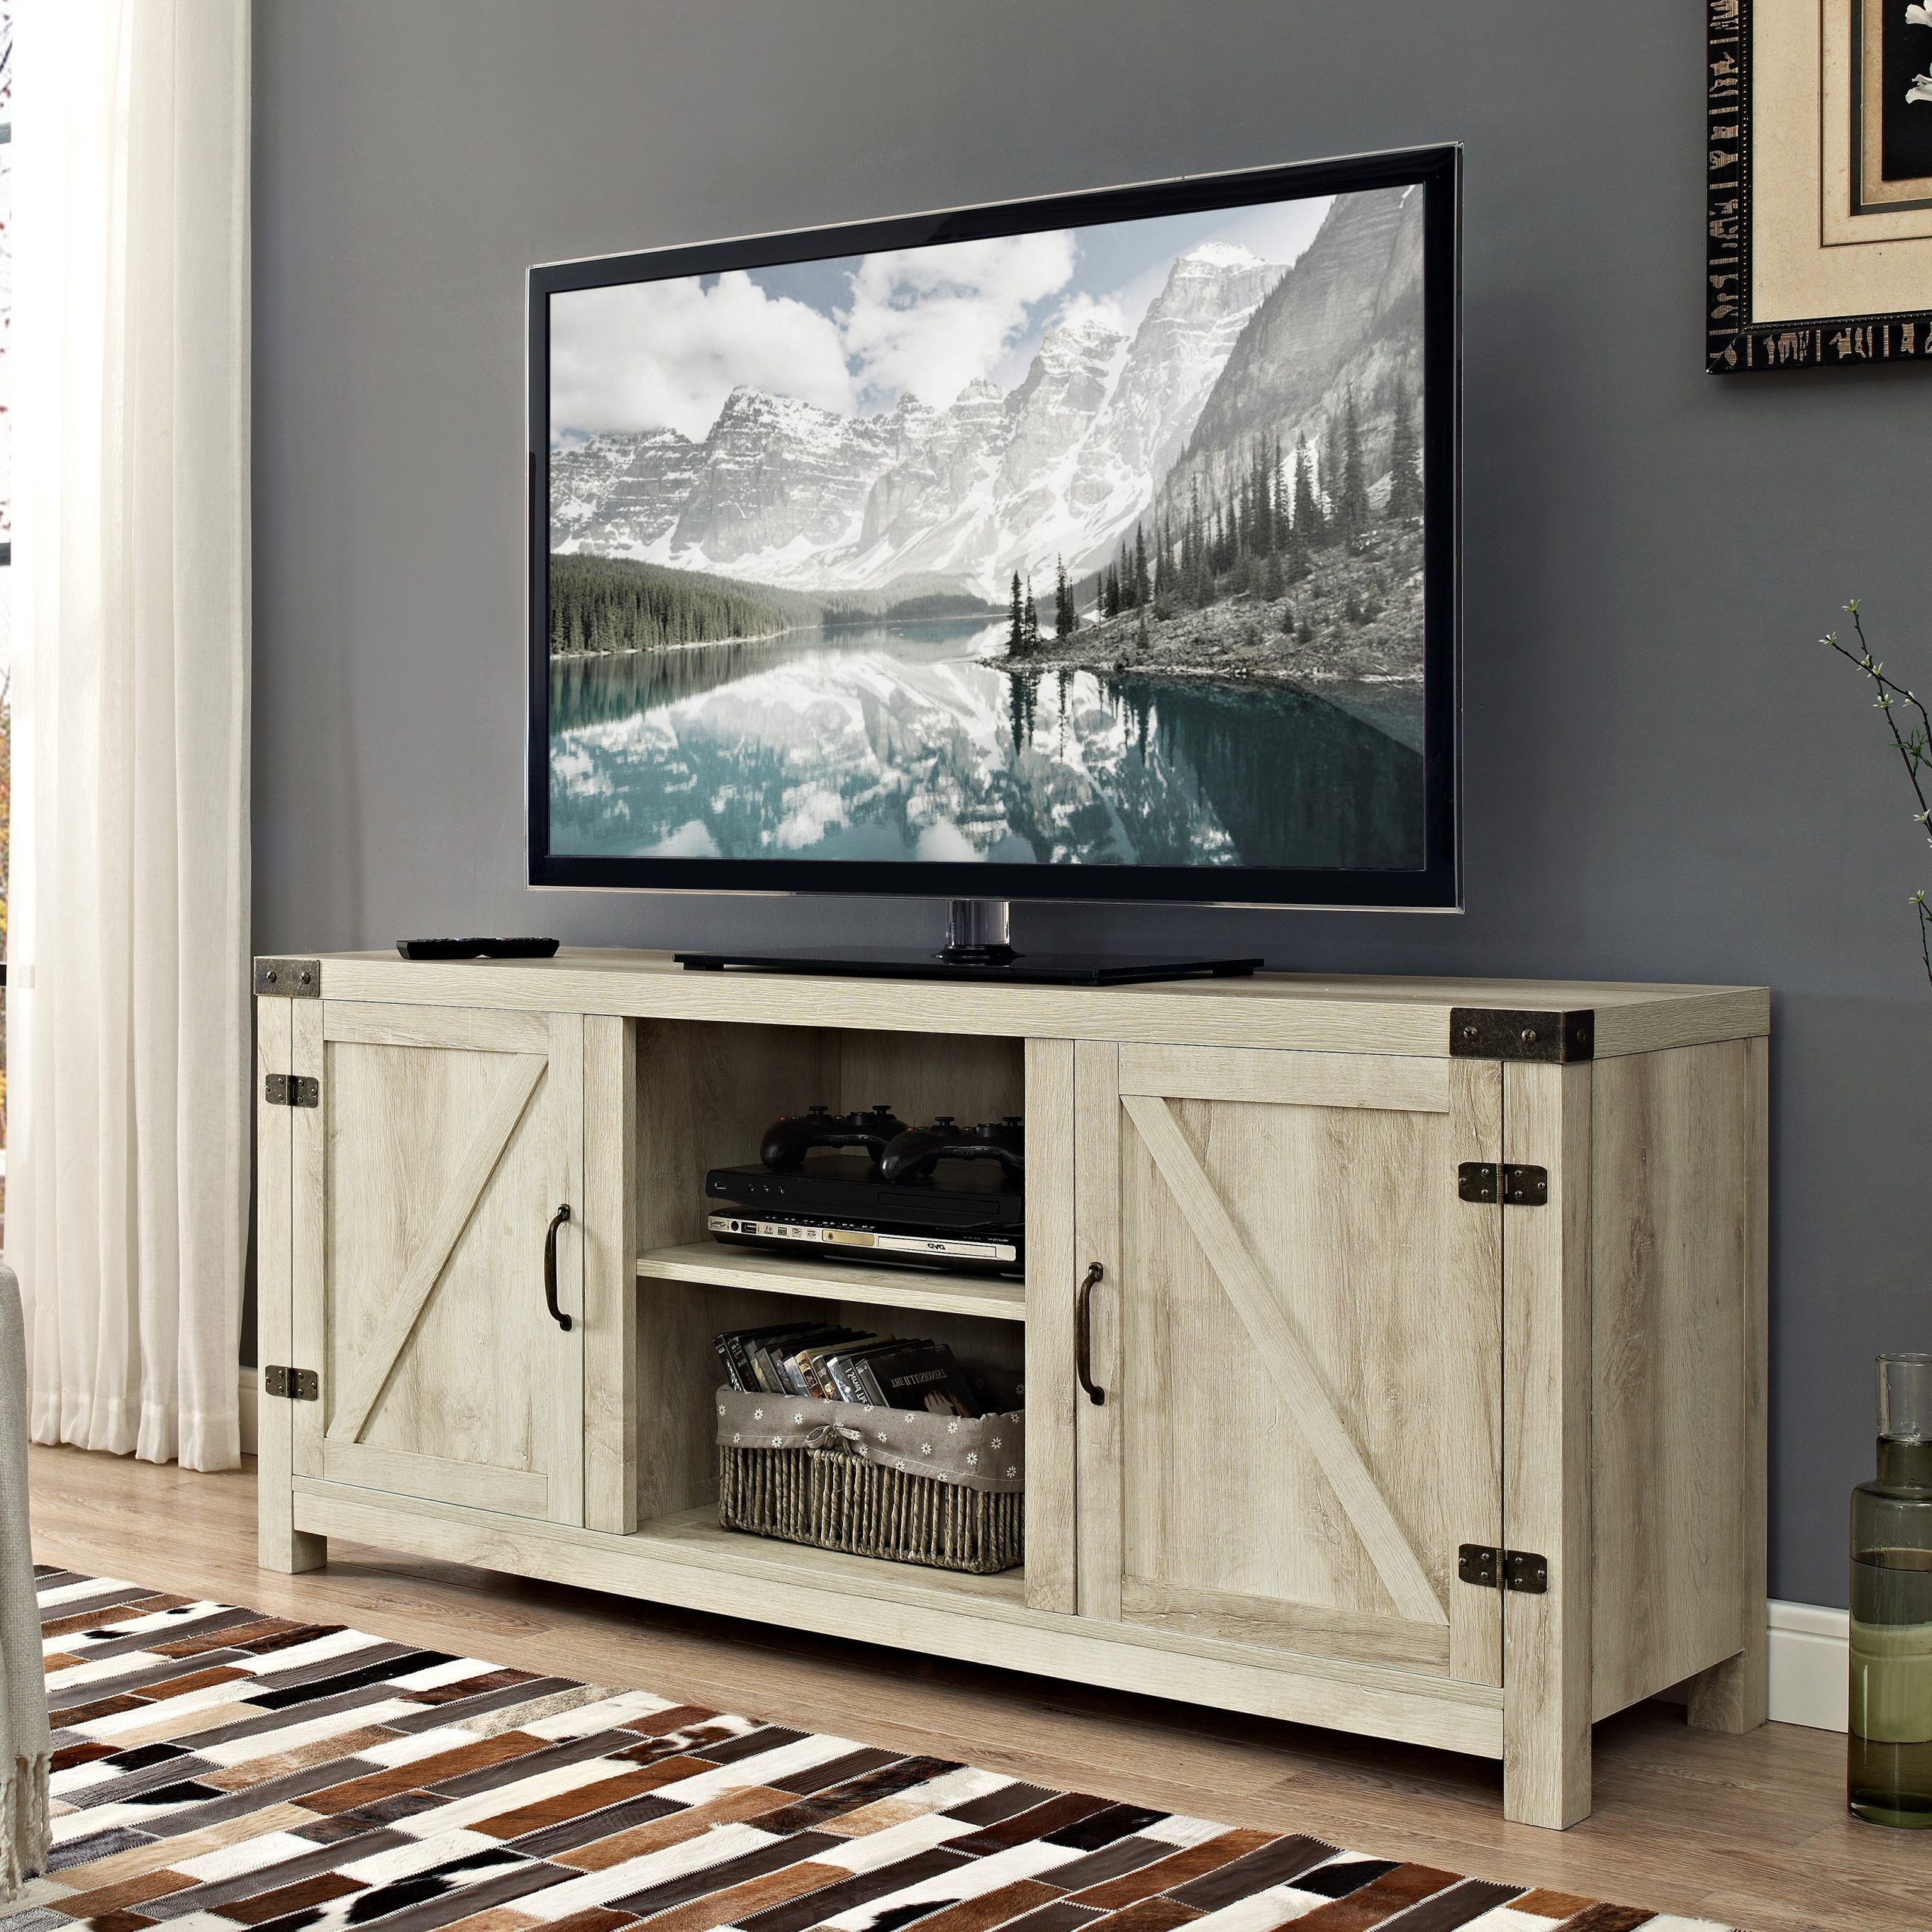 Woven Paths Modern Farmhouse Barn Door Tv Stand For Tvs Up Within Caleah Tv Stands For Tvs Up To 65" (View 8 of 20)